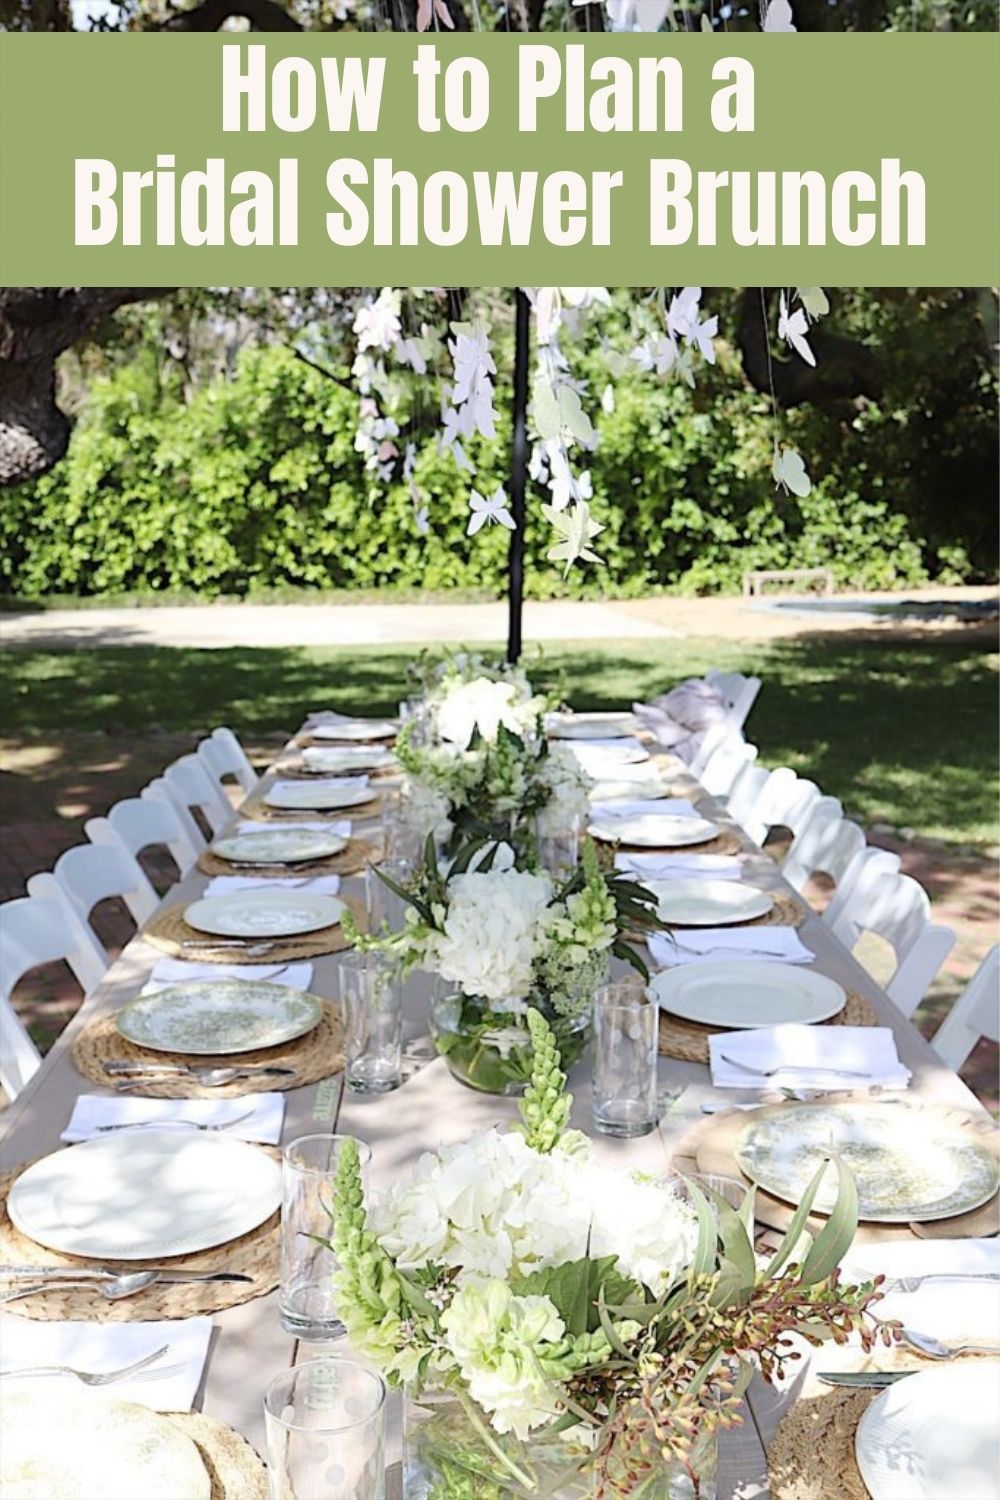 Wedding season is upon us and some of you are looking for ideas. Today I am sharing ideas for How to Plan a Bridal Shower Brunch.